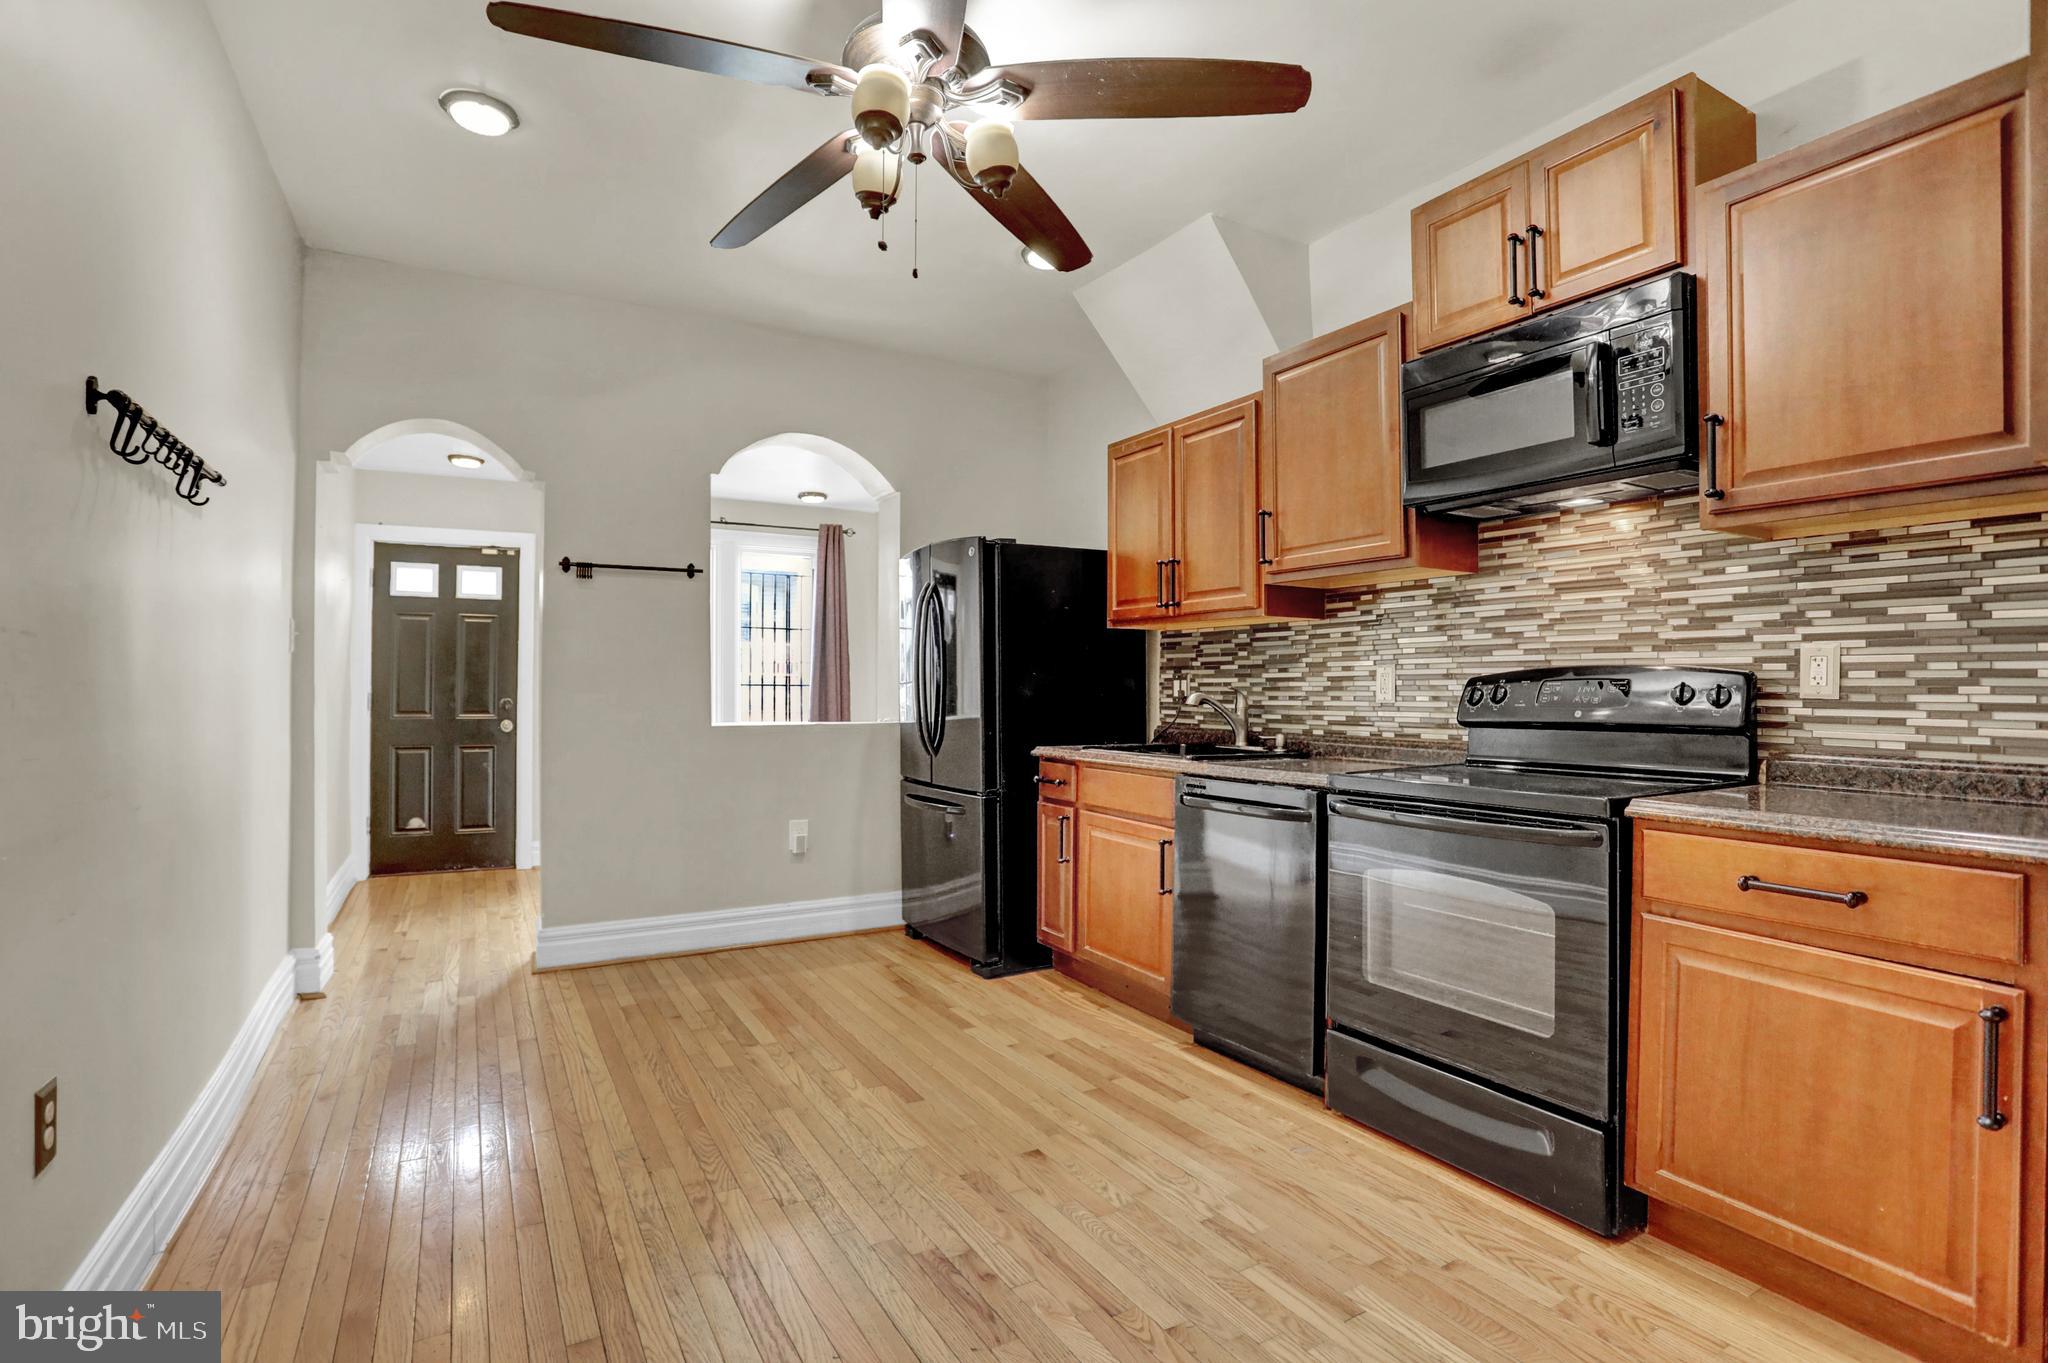 a kitchen with stainless steel appliances granite countertop a stove cabinets and wooden floor